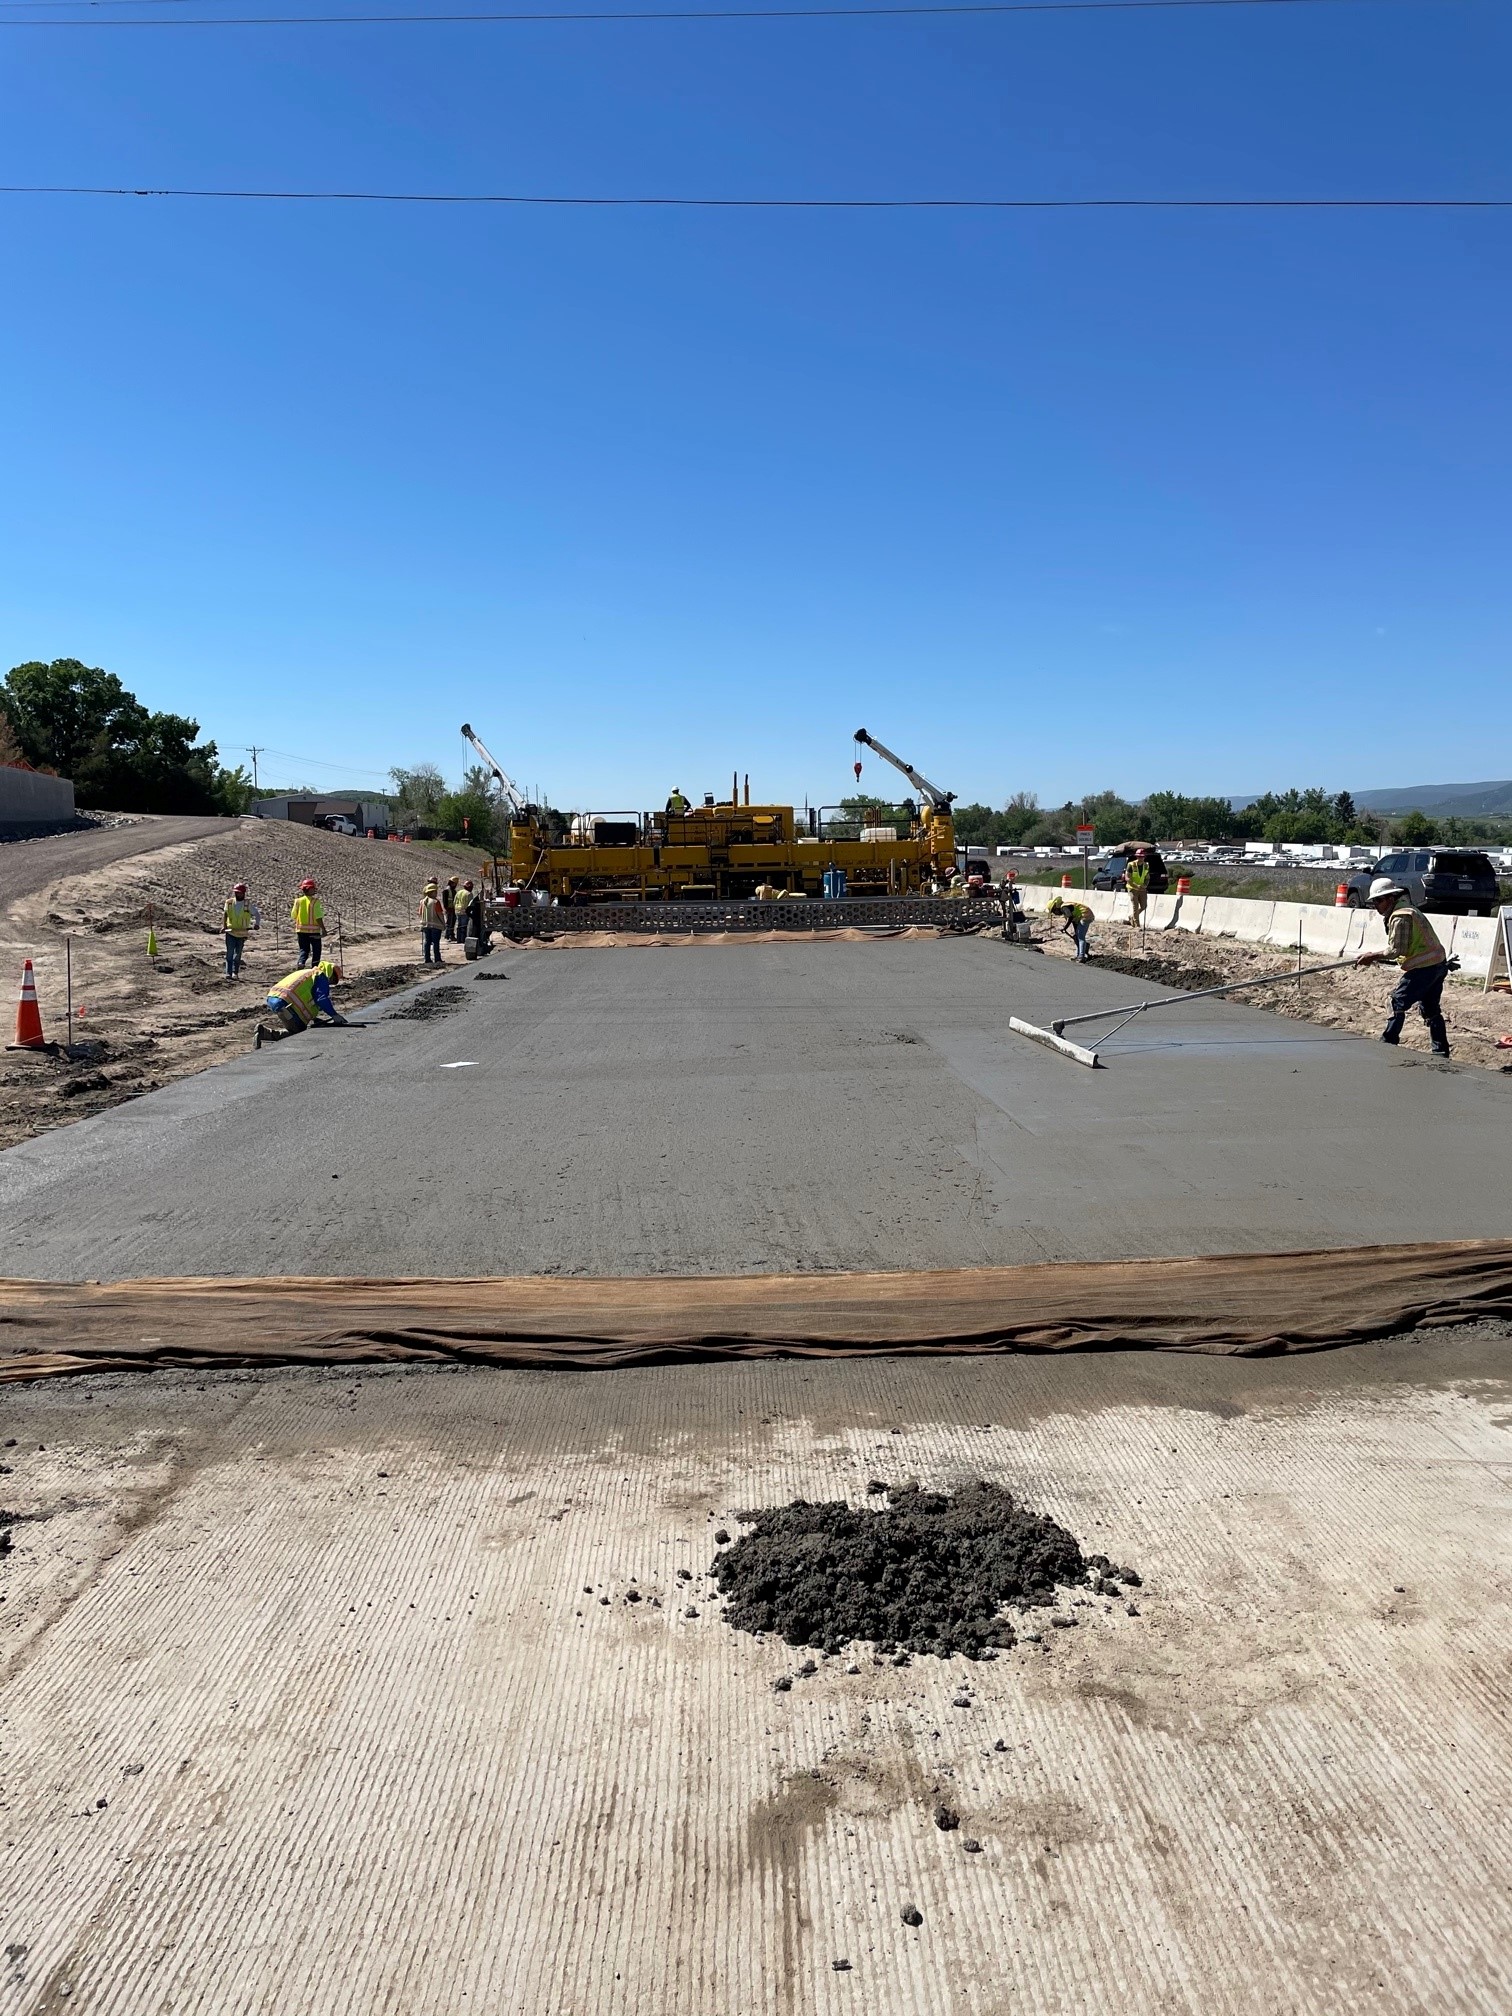 Paving activities on the northbound side of US 85 | June 2021 detail image